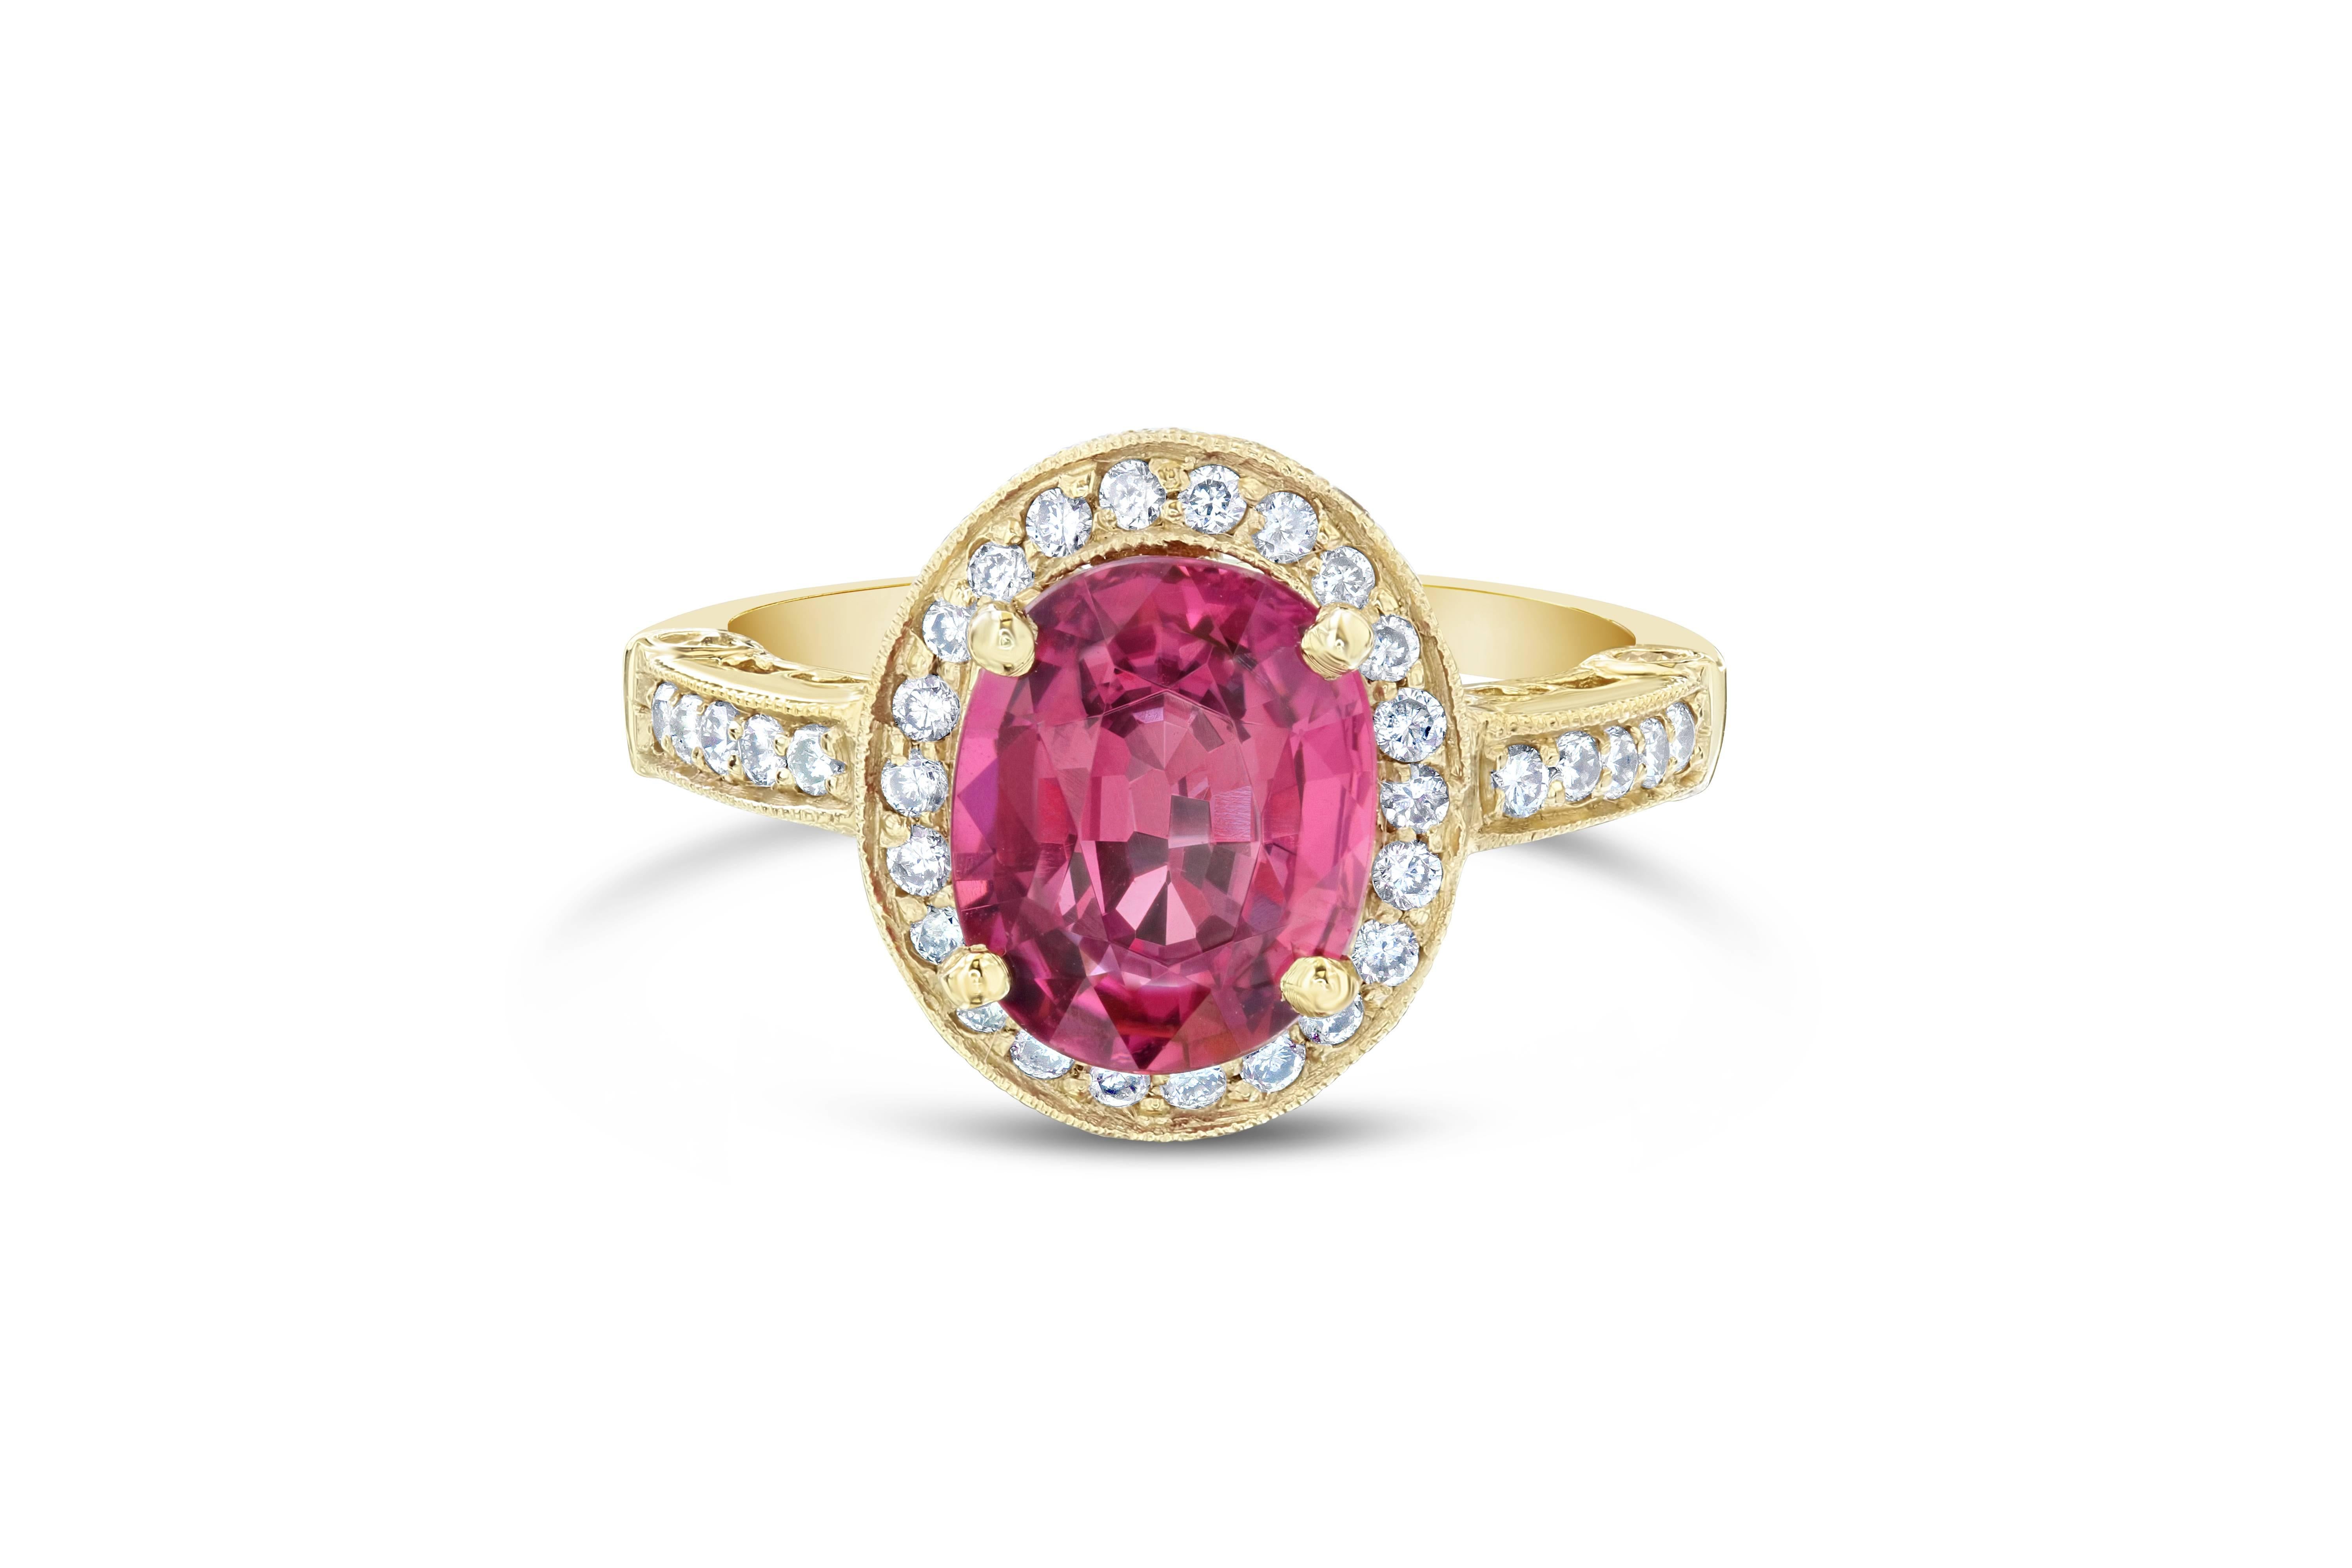 Unique, beautiful and bright Tourmaline and Diamond Ring with an antique style setting. Wear it as a Cocktail, Fashion or as an Everyday Ring! 

The Oval Cut Tourmaline is 2.46 Carats surrounded by beautifully set 73 Round Cut Diamonds weighing 0.70